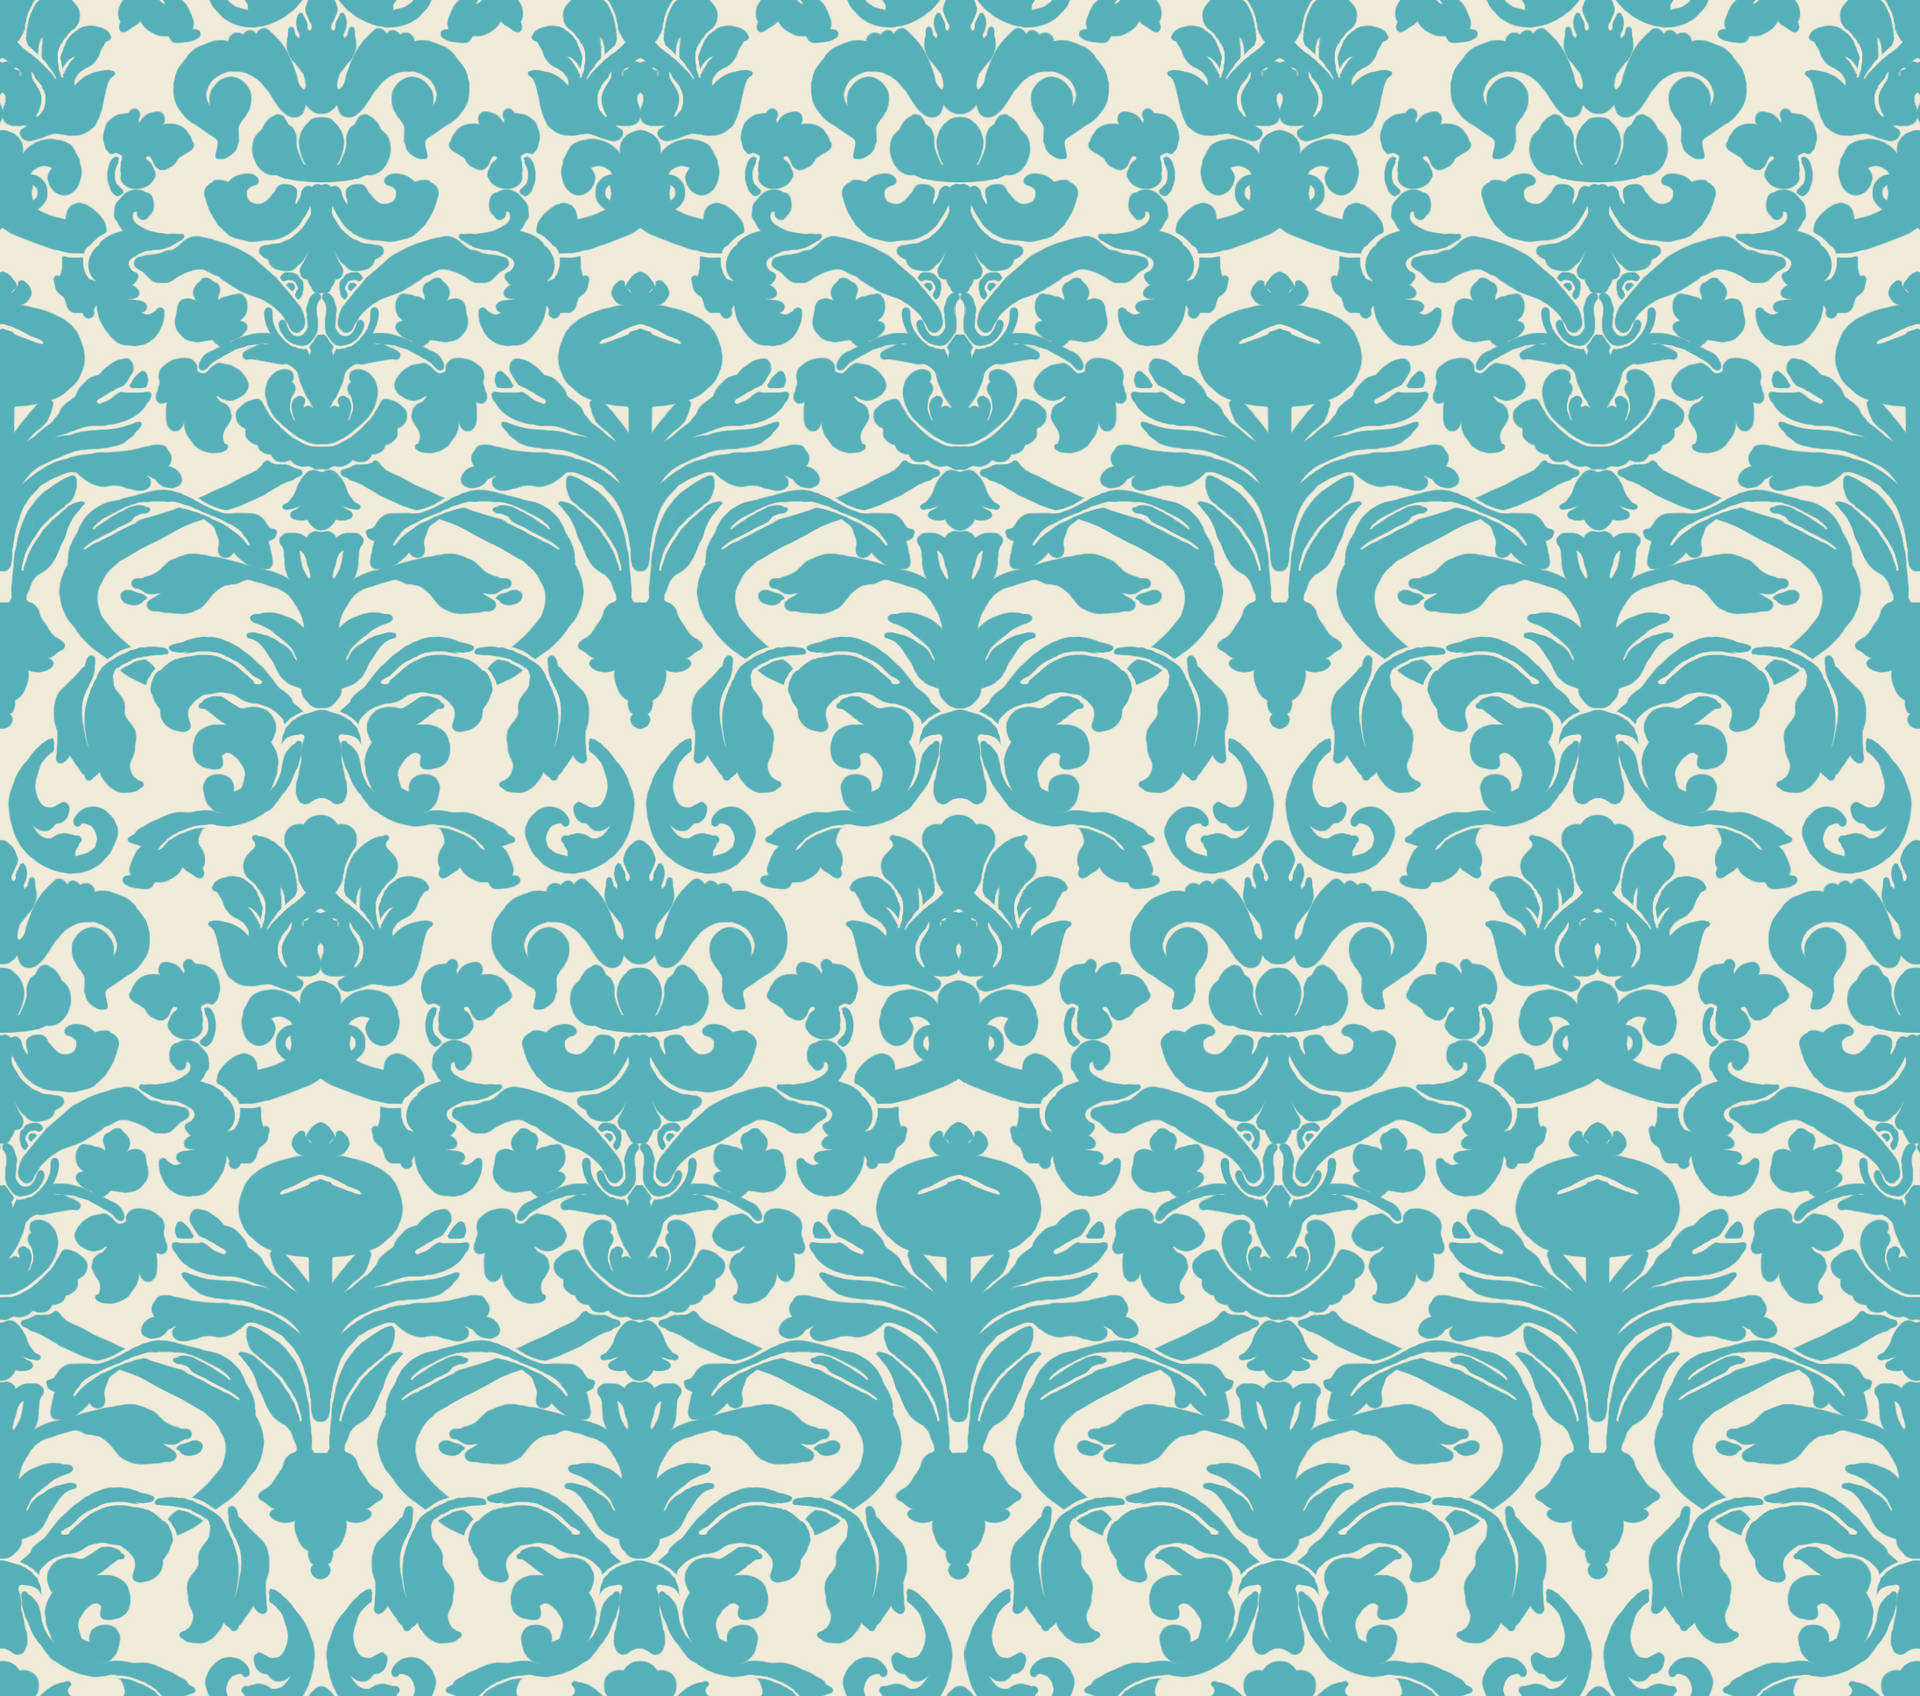 Intricate Damask Print Aesthetic Teal Background